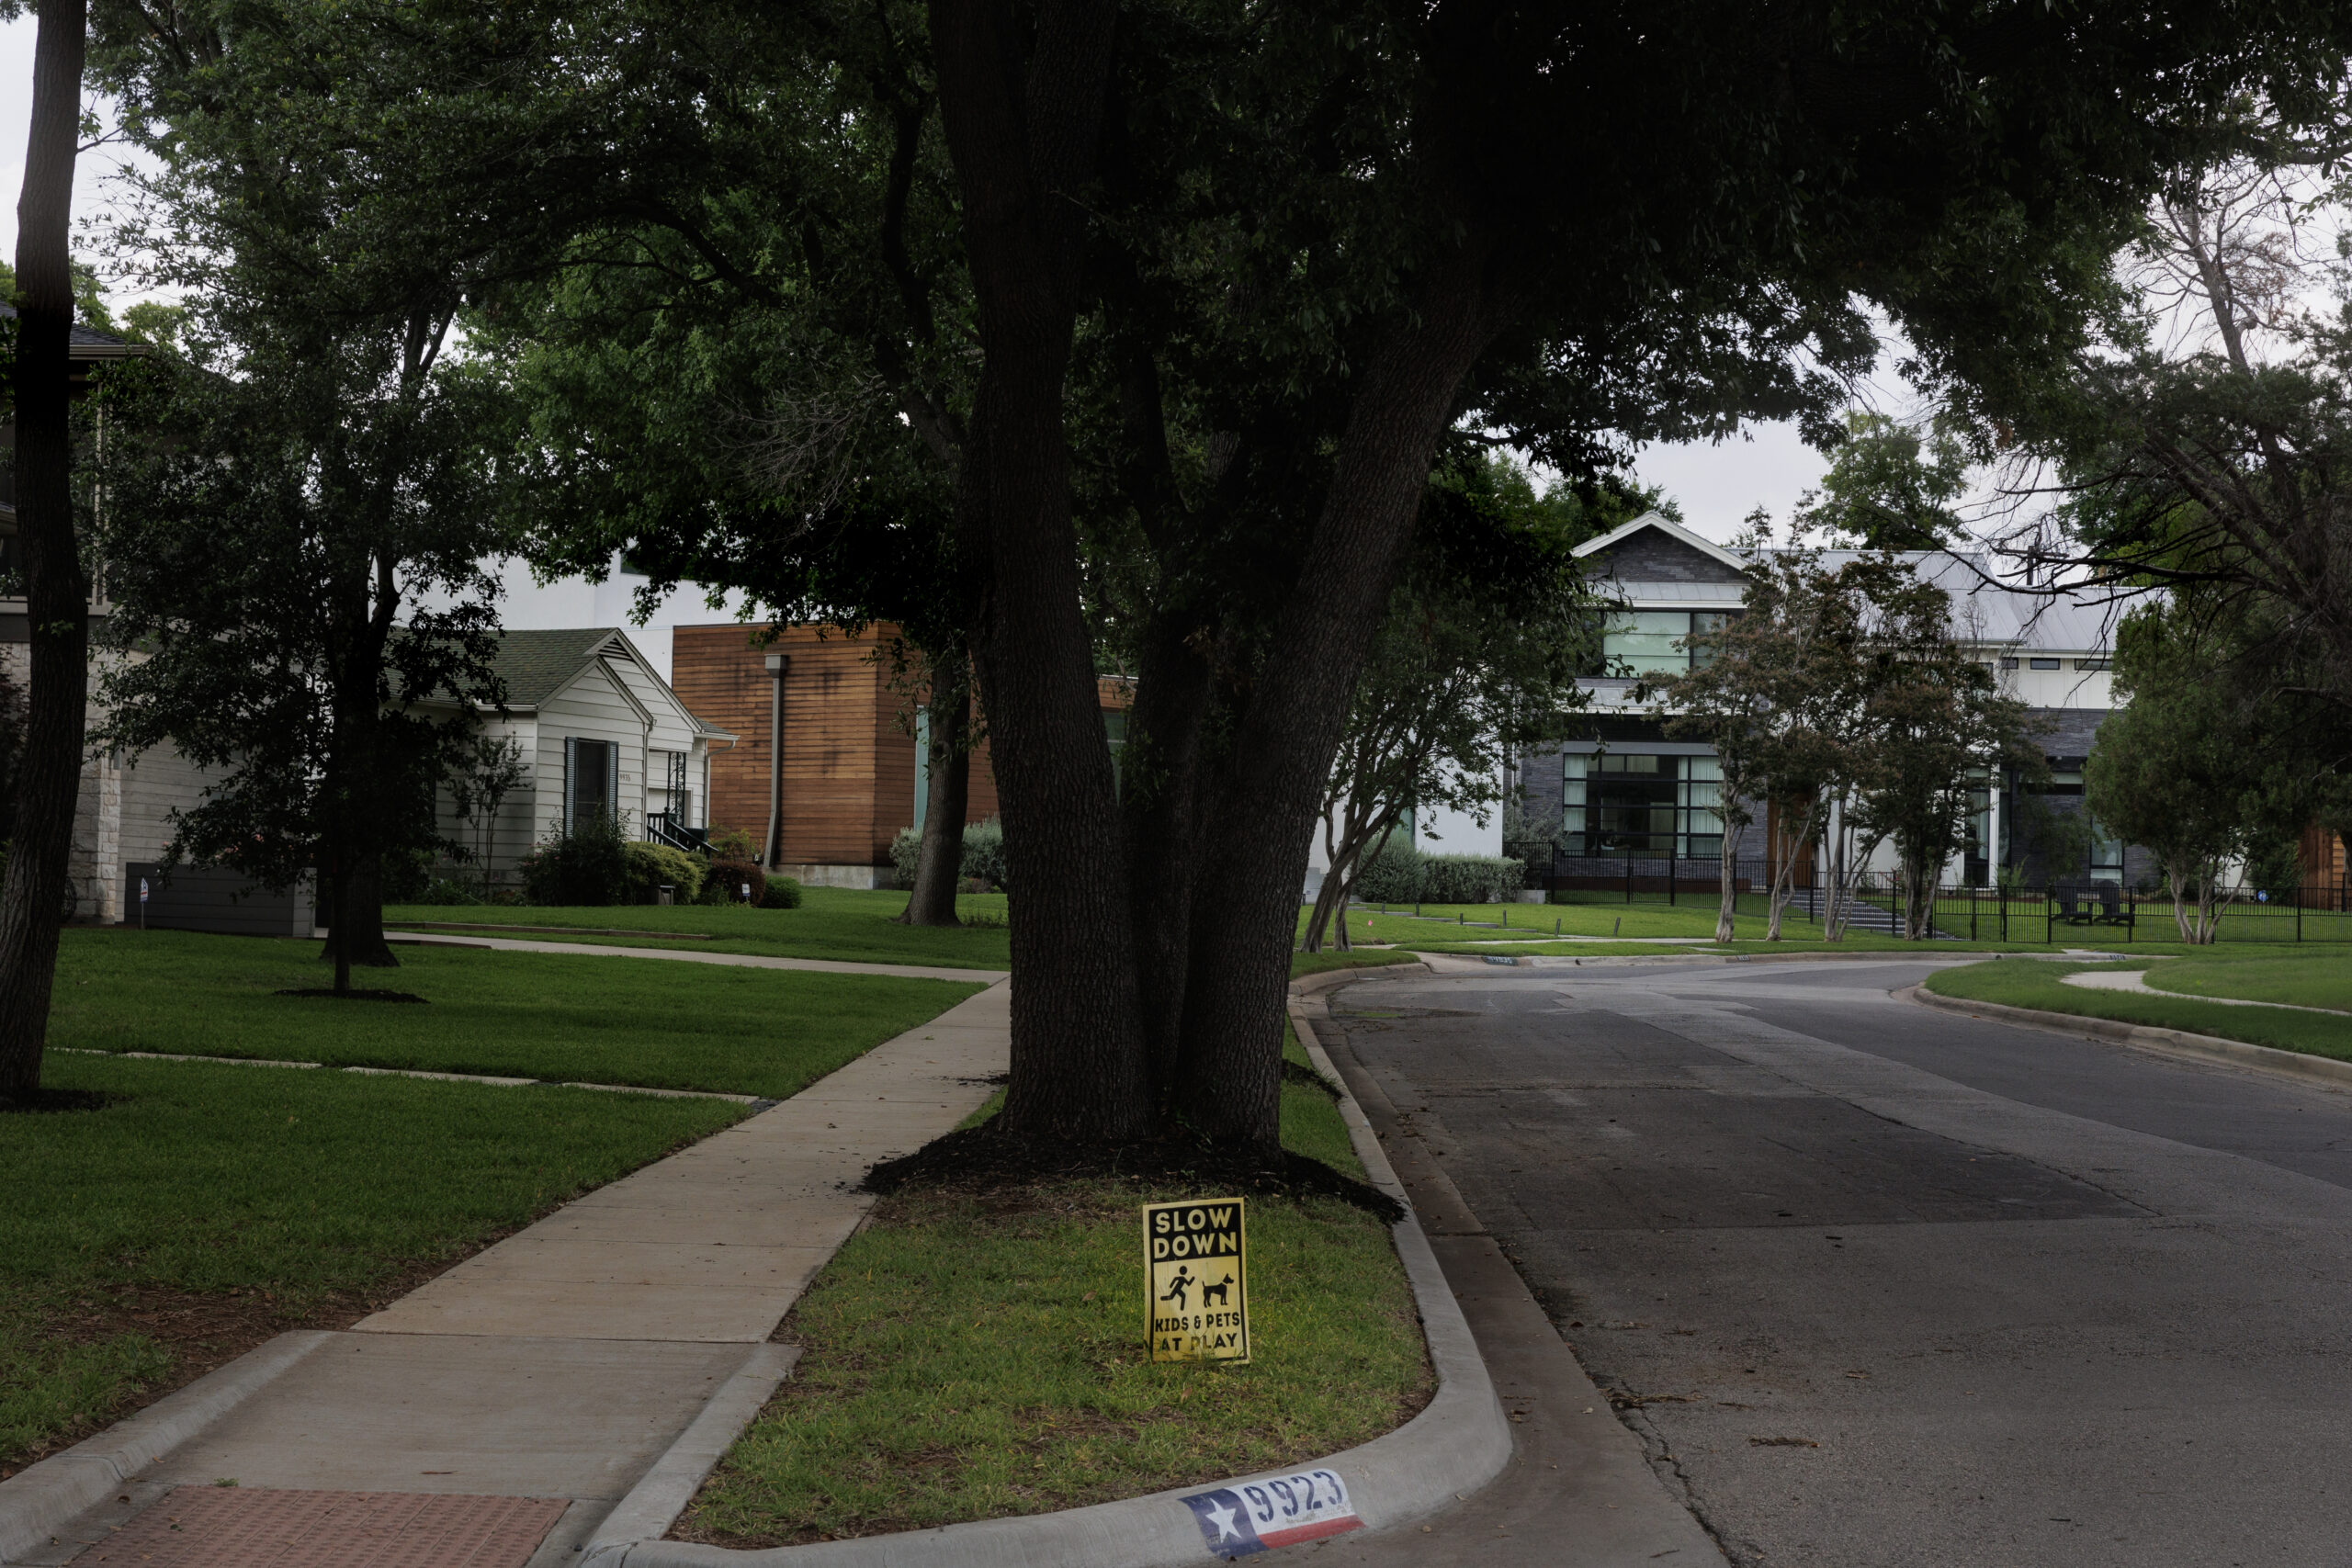 A residential street with modern mid- to large-sized homes, and a huge oak growing in the foreground. At the base of an oak is a yellow sign reading "Slow down, Kids & Pets at Play." The street looks placid. No cars are currently visible.